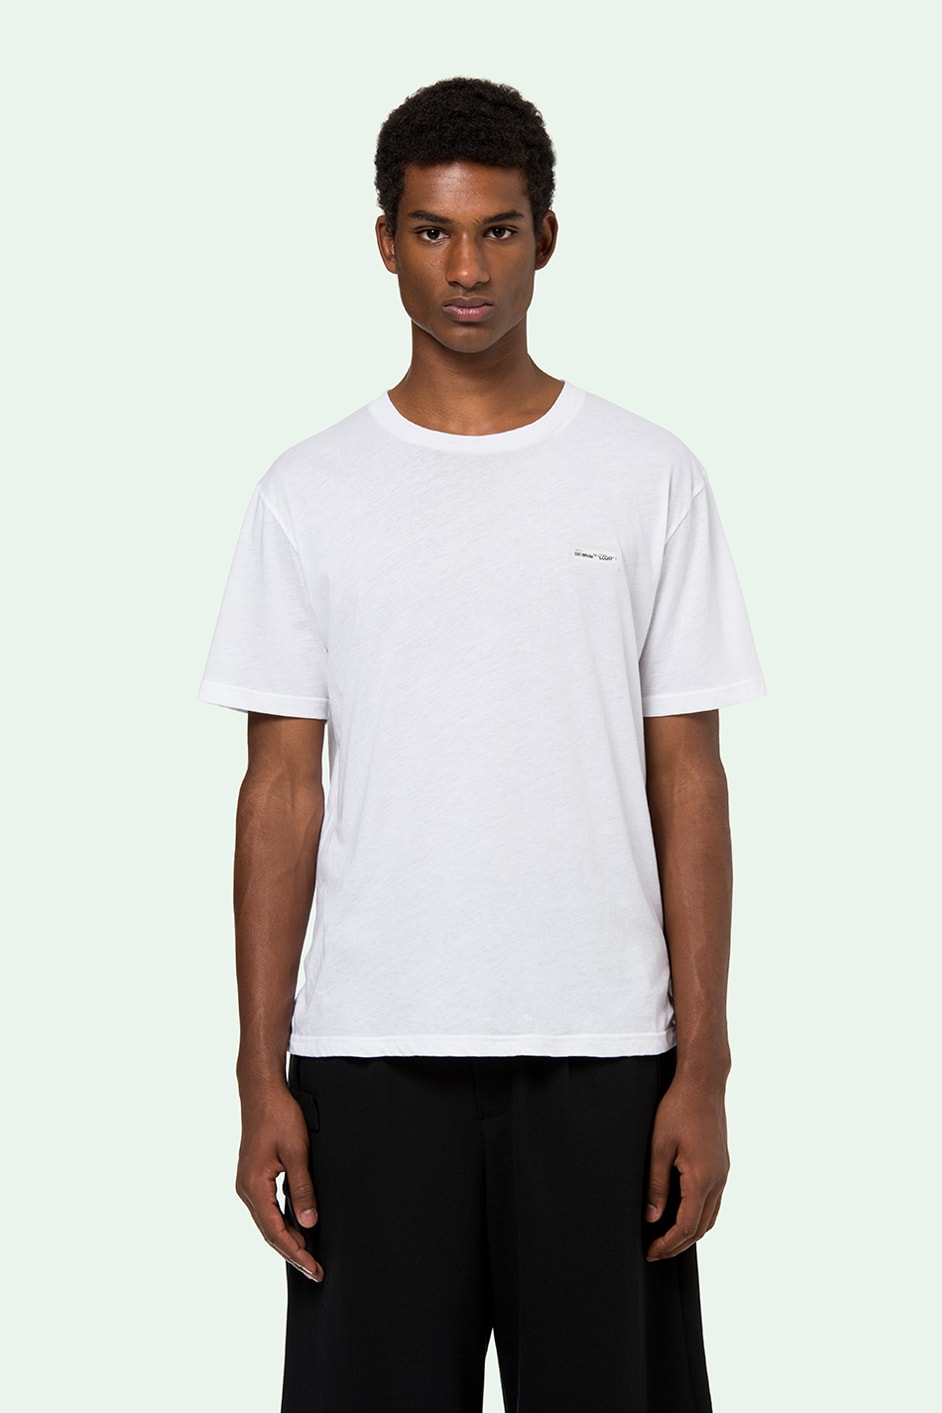 Off-White Virgil Abloh T-Shirt Pack March 2018 Delivery Date